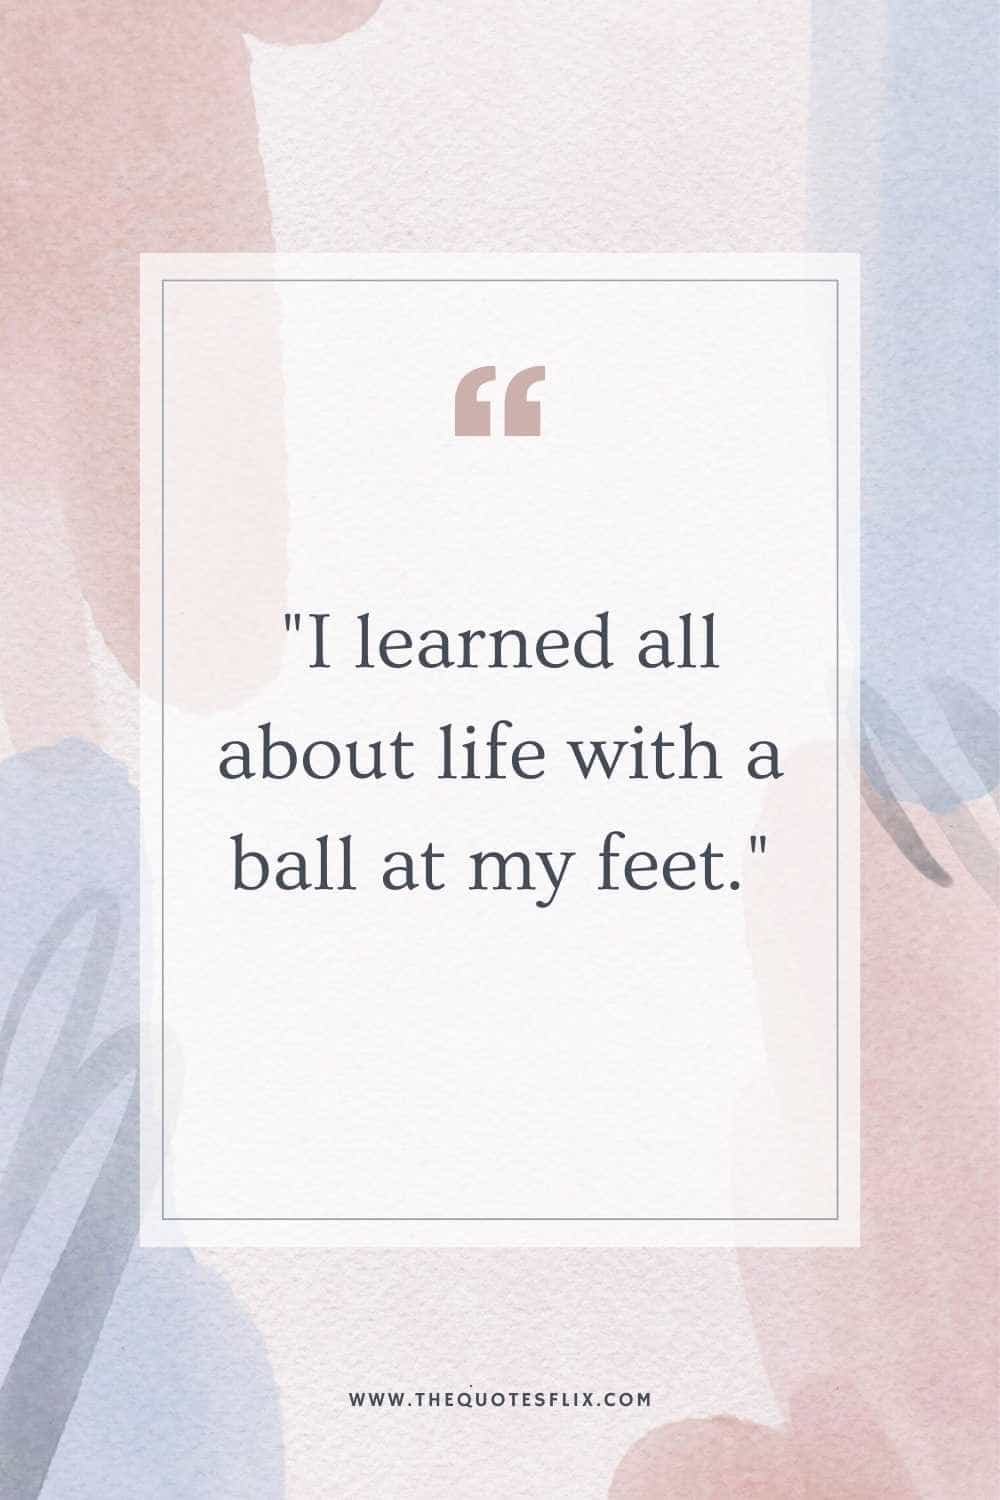 Quotes On Football Love - i learned about life with ball in my feet